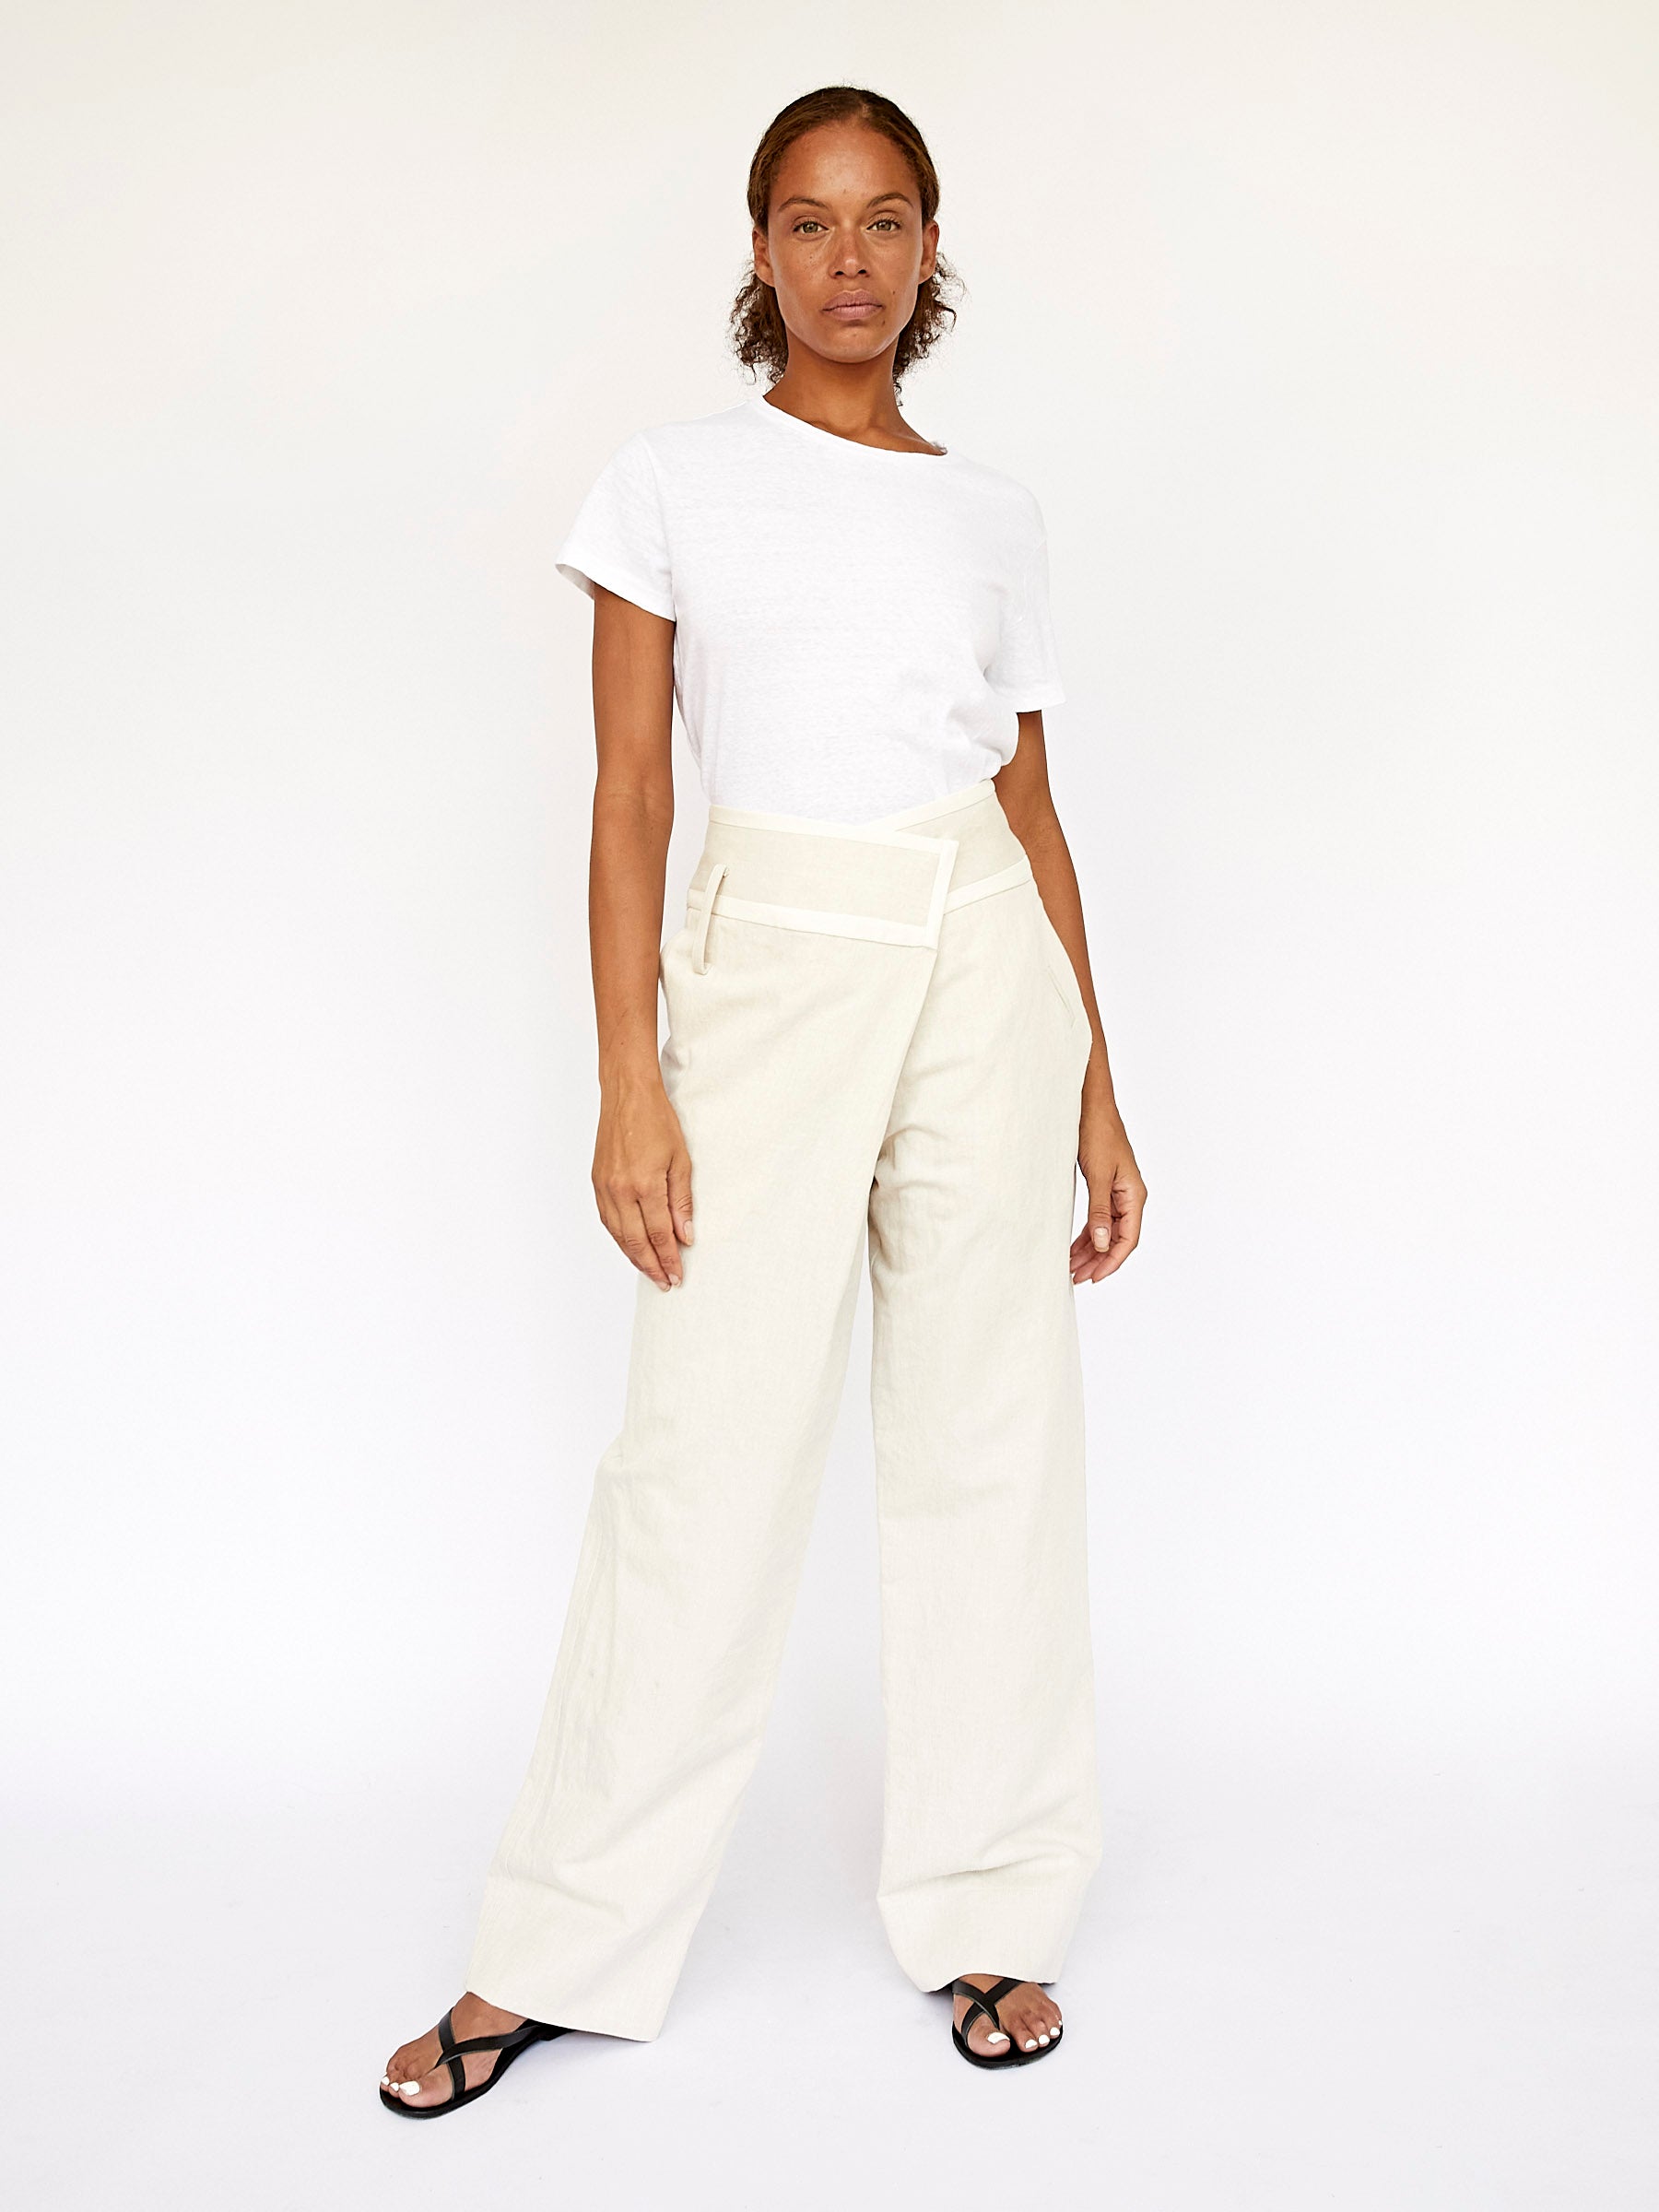 White handmade cotton trousers that fit like a dream Zippered openings  Unzippered versatility